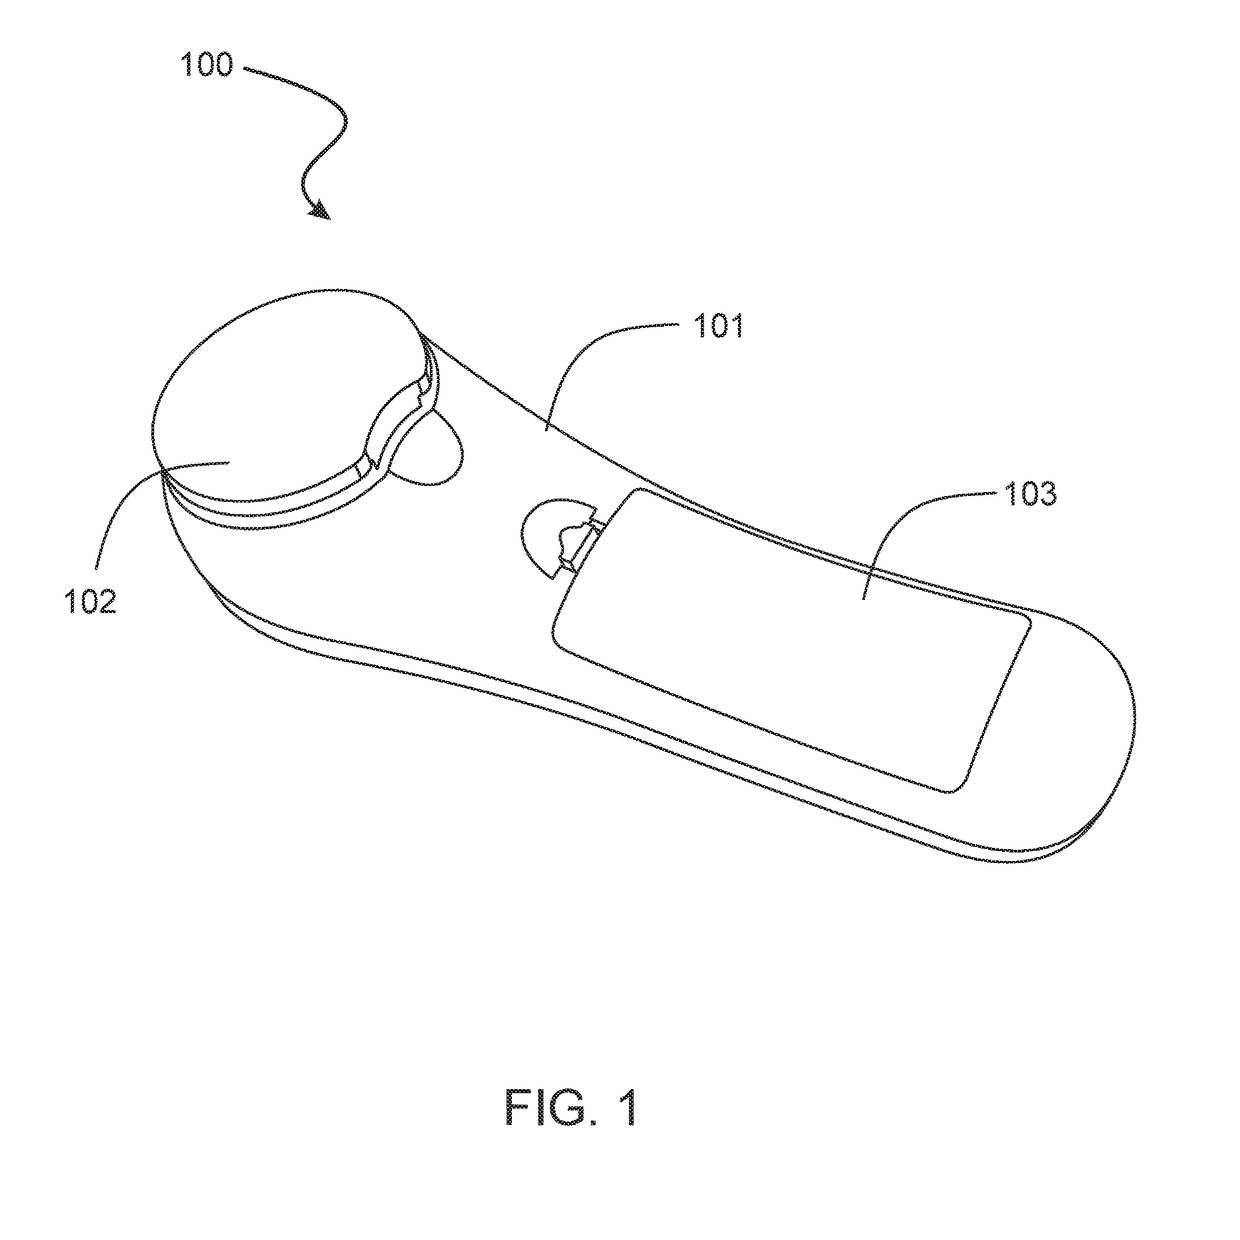 Application of topical product using a sonic device